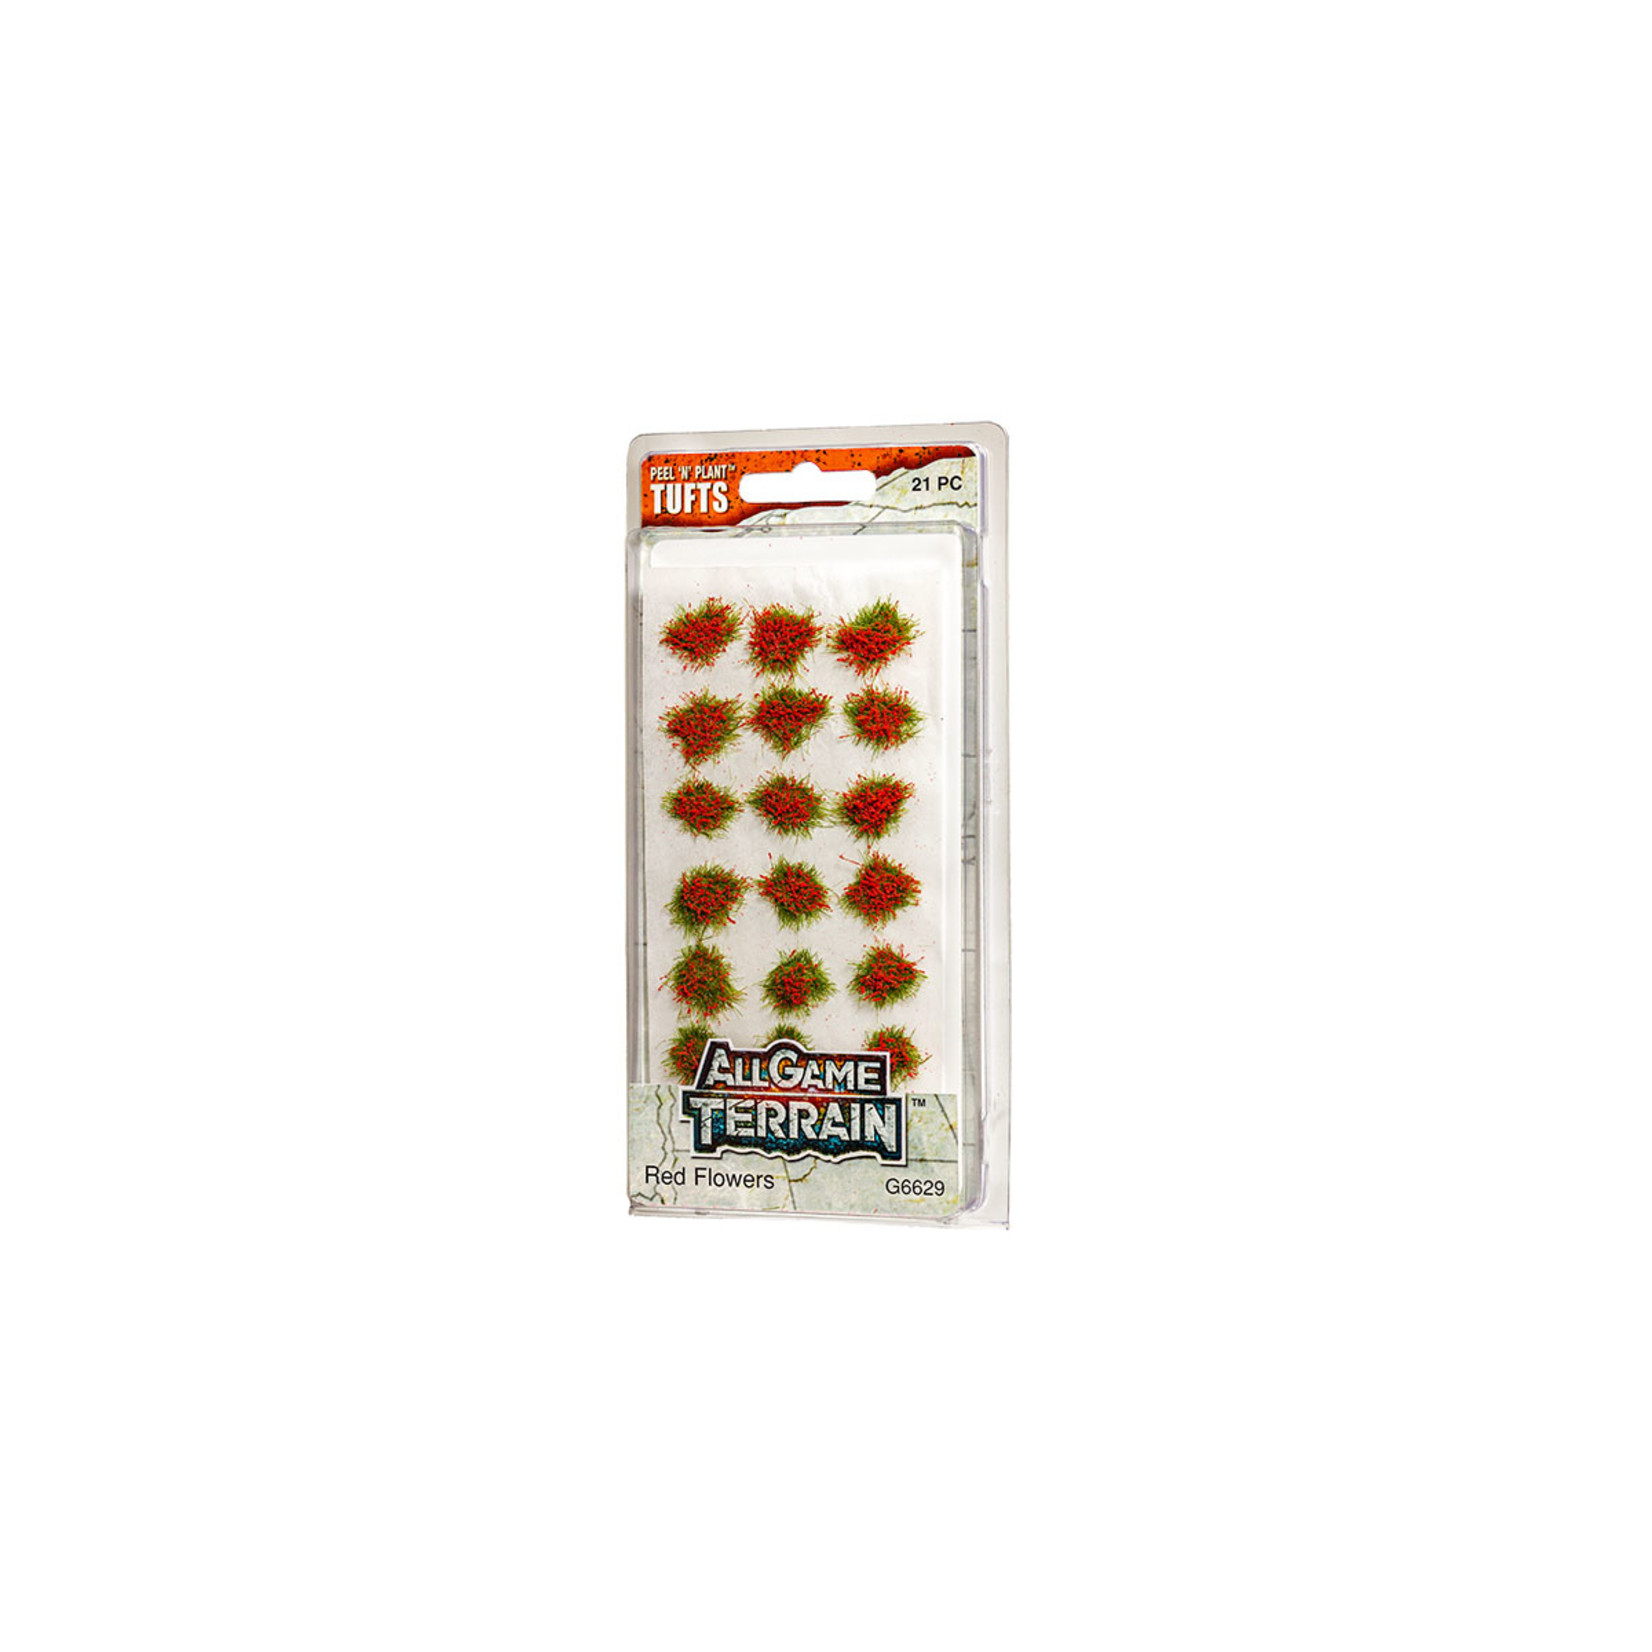 Woodland Scenics All Game Terrain G6629 Peel 'N' Plant Tufts Red Flowers (21)